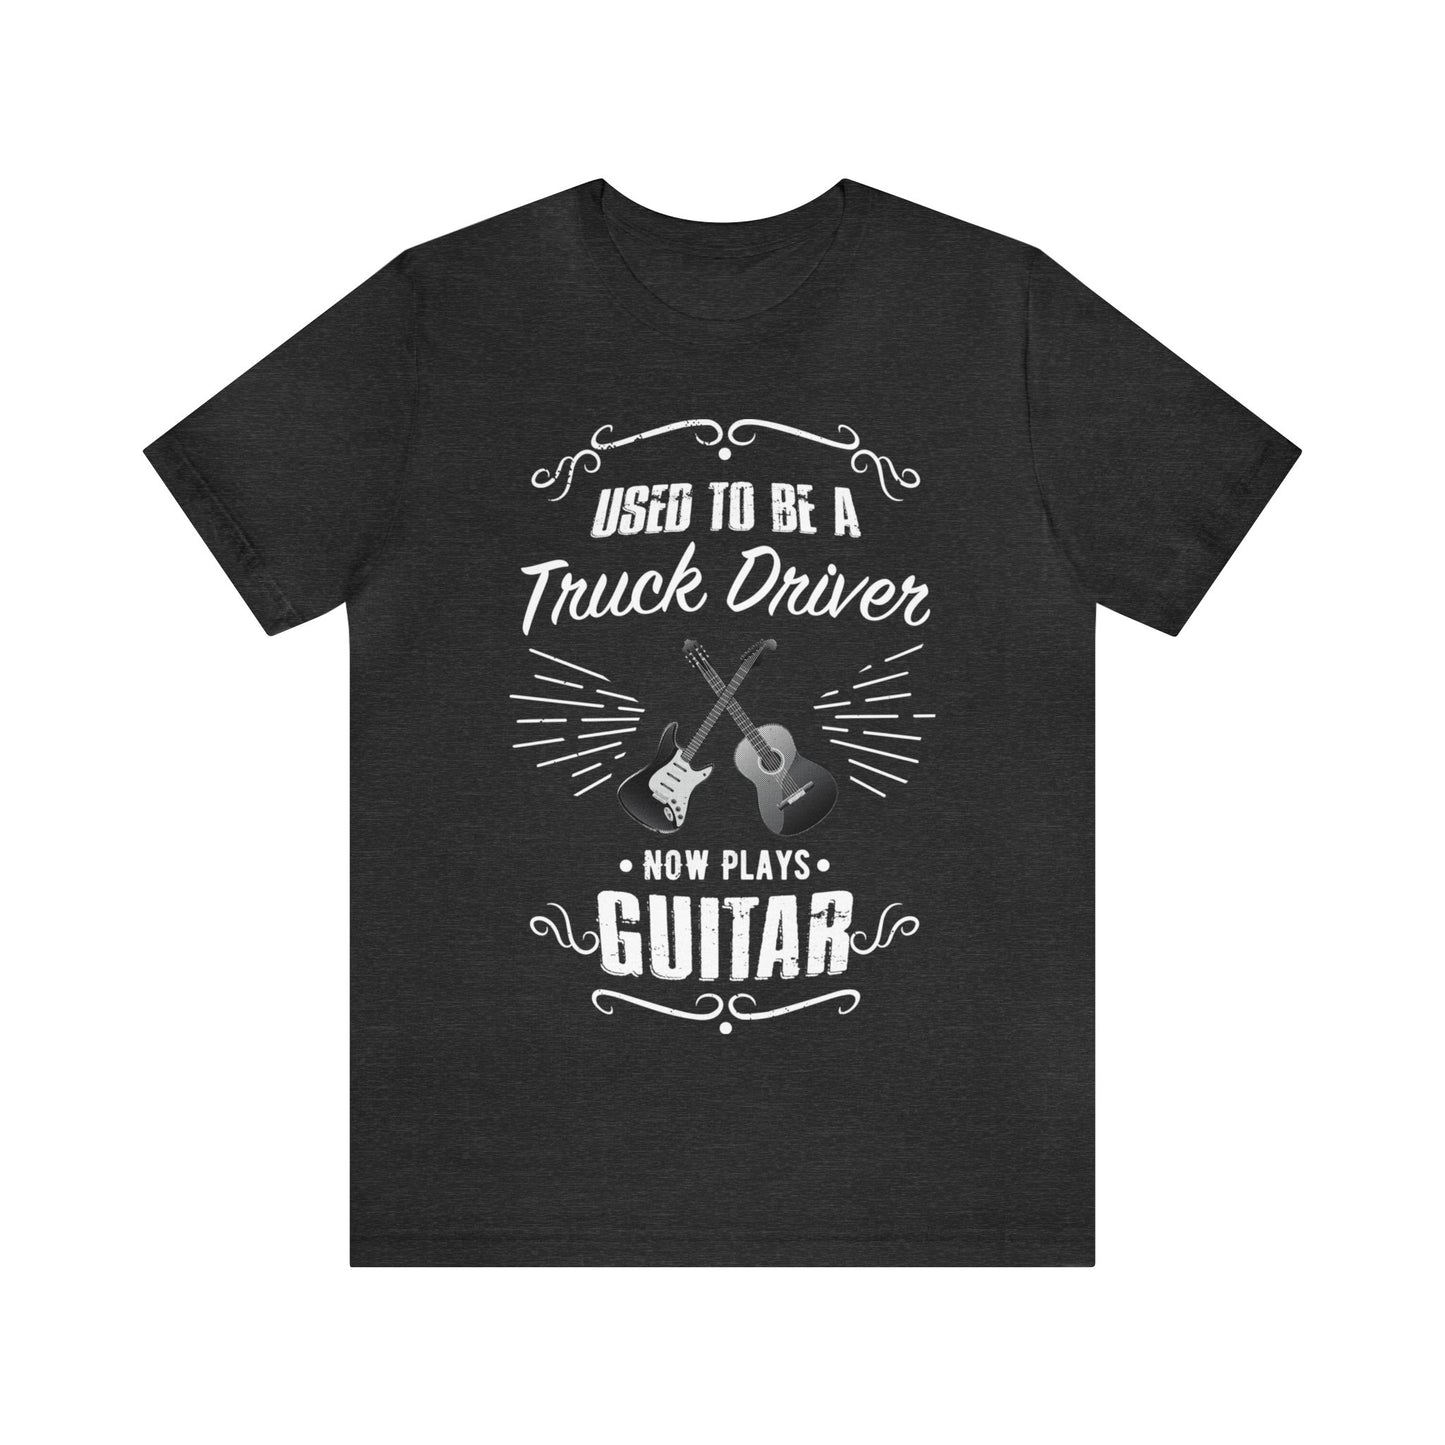 Used to be a TRUCK DRIVER; Now Plays GUITAR - Funny Retirement Gift, Unisex T-shirt Bella+Canvas 3001, dark colors for amateur musician/guitar player